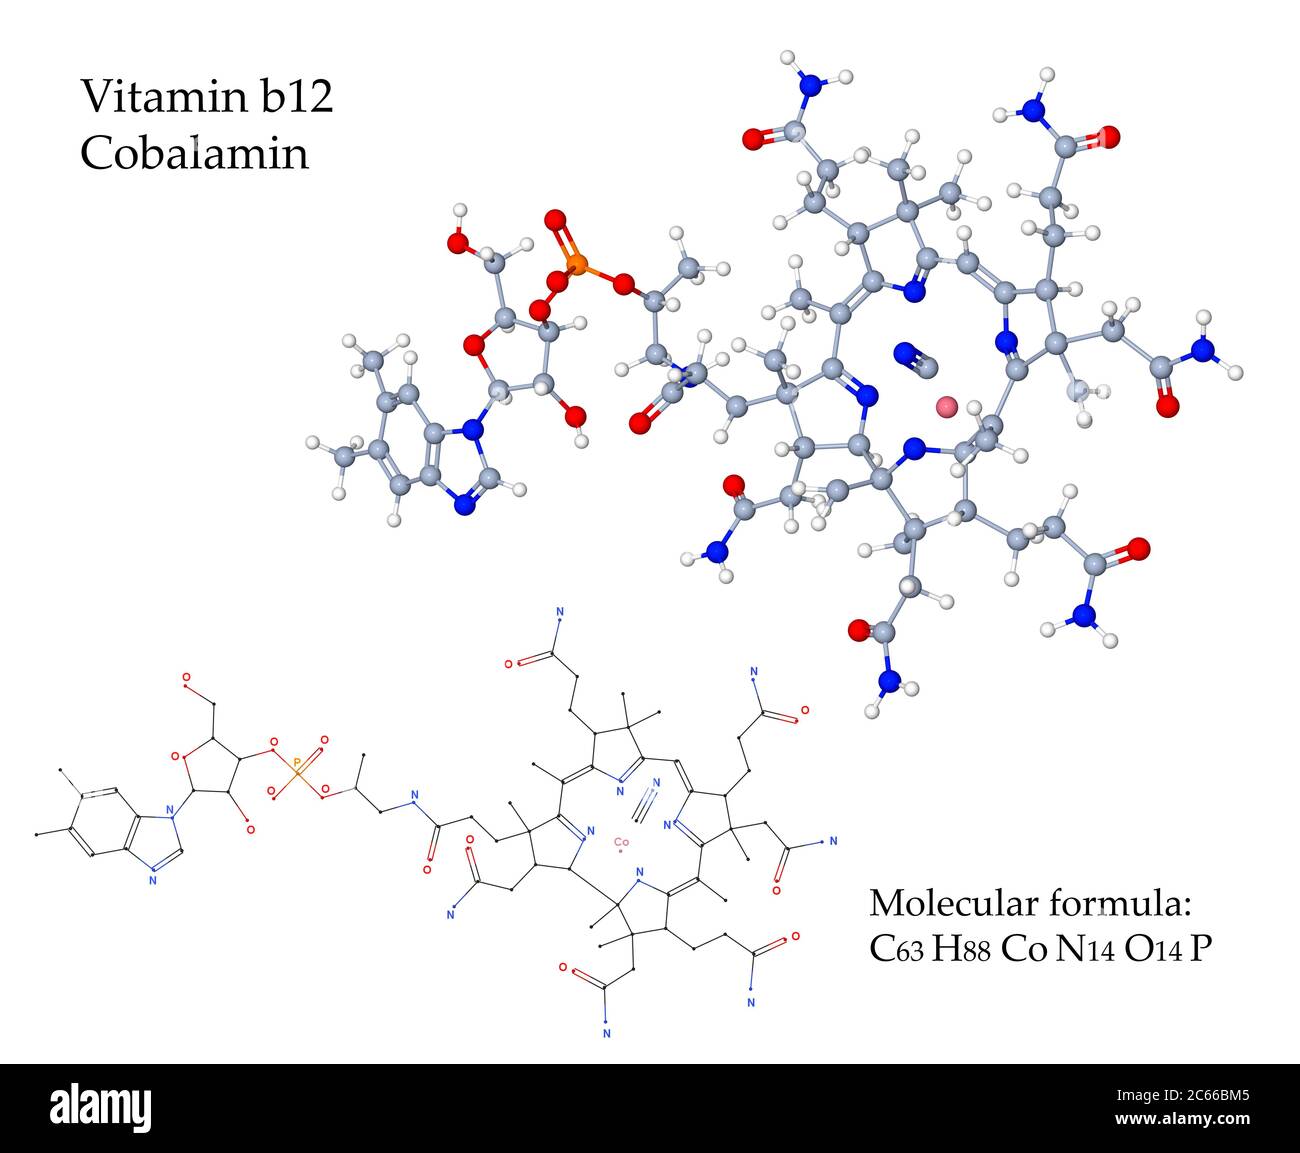 Vitamin B12 Cobalamin is essential for the synthesis of red blood cells by the bone marrow. Food sources are animal products such as meat, milk, eggs Stock Photo